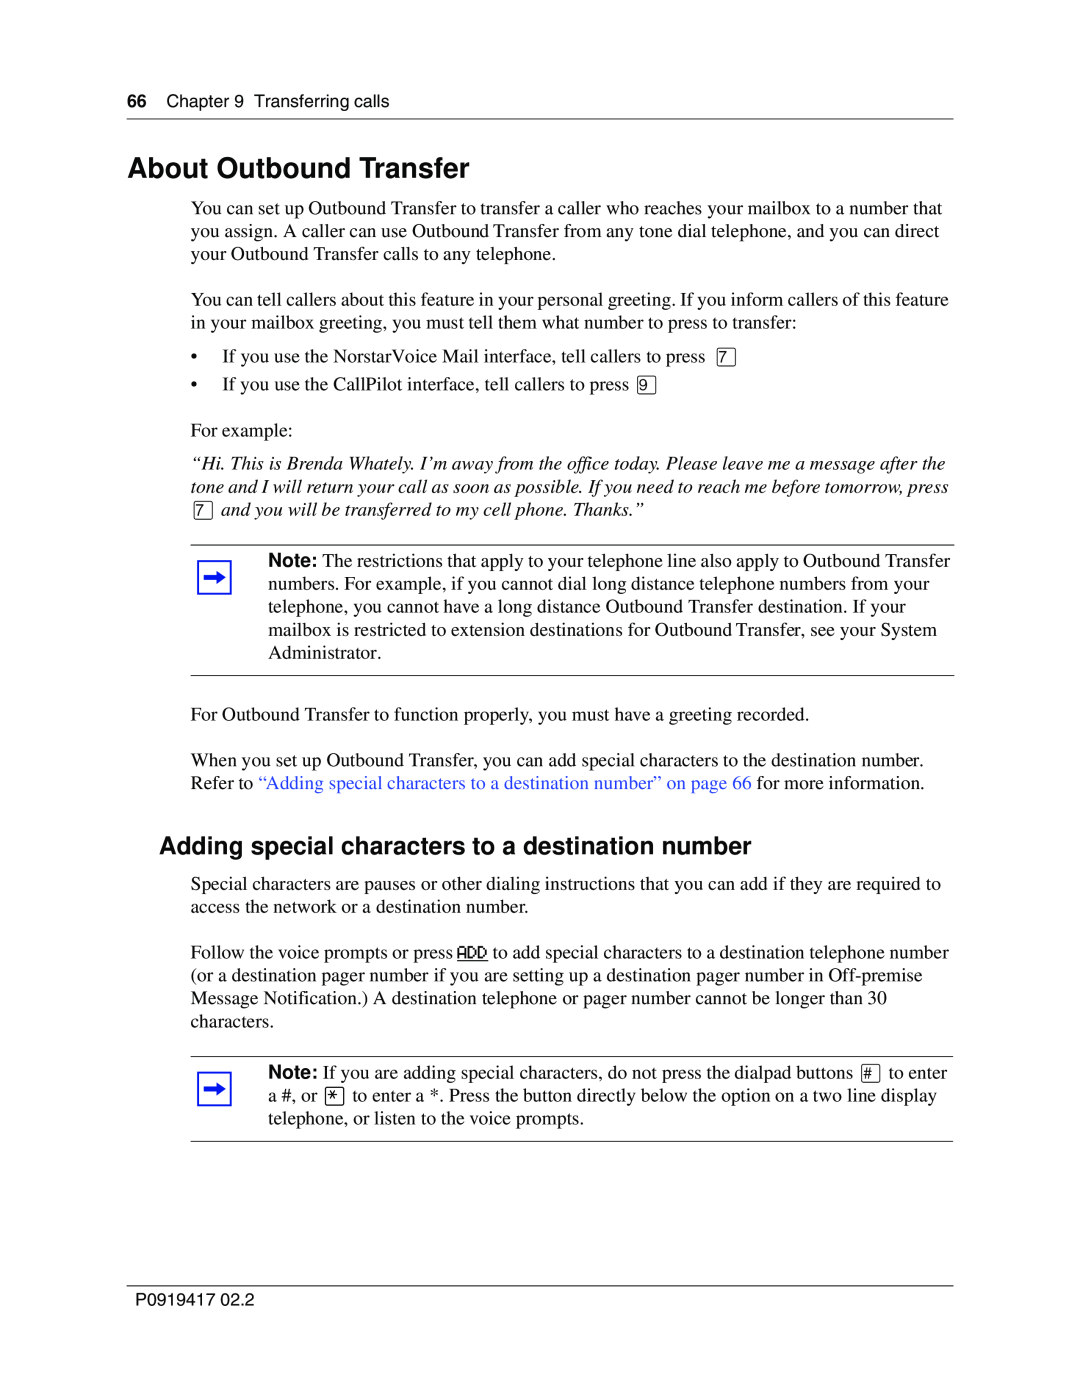 Nortel Networks CallPilot manual About Outbound Transfer, Adding special characters to a destination number 